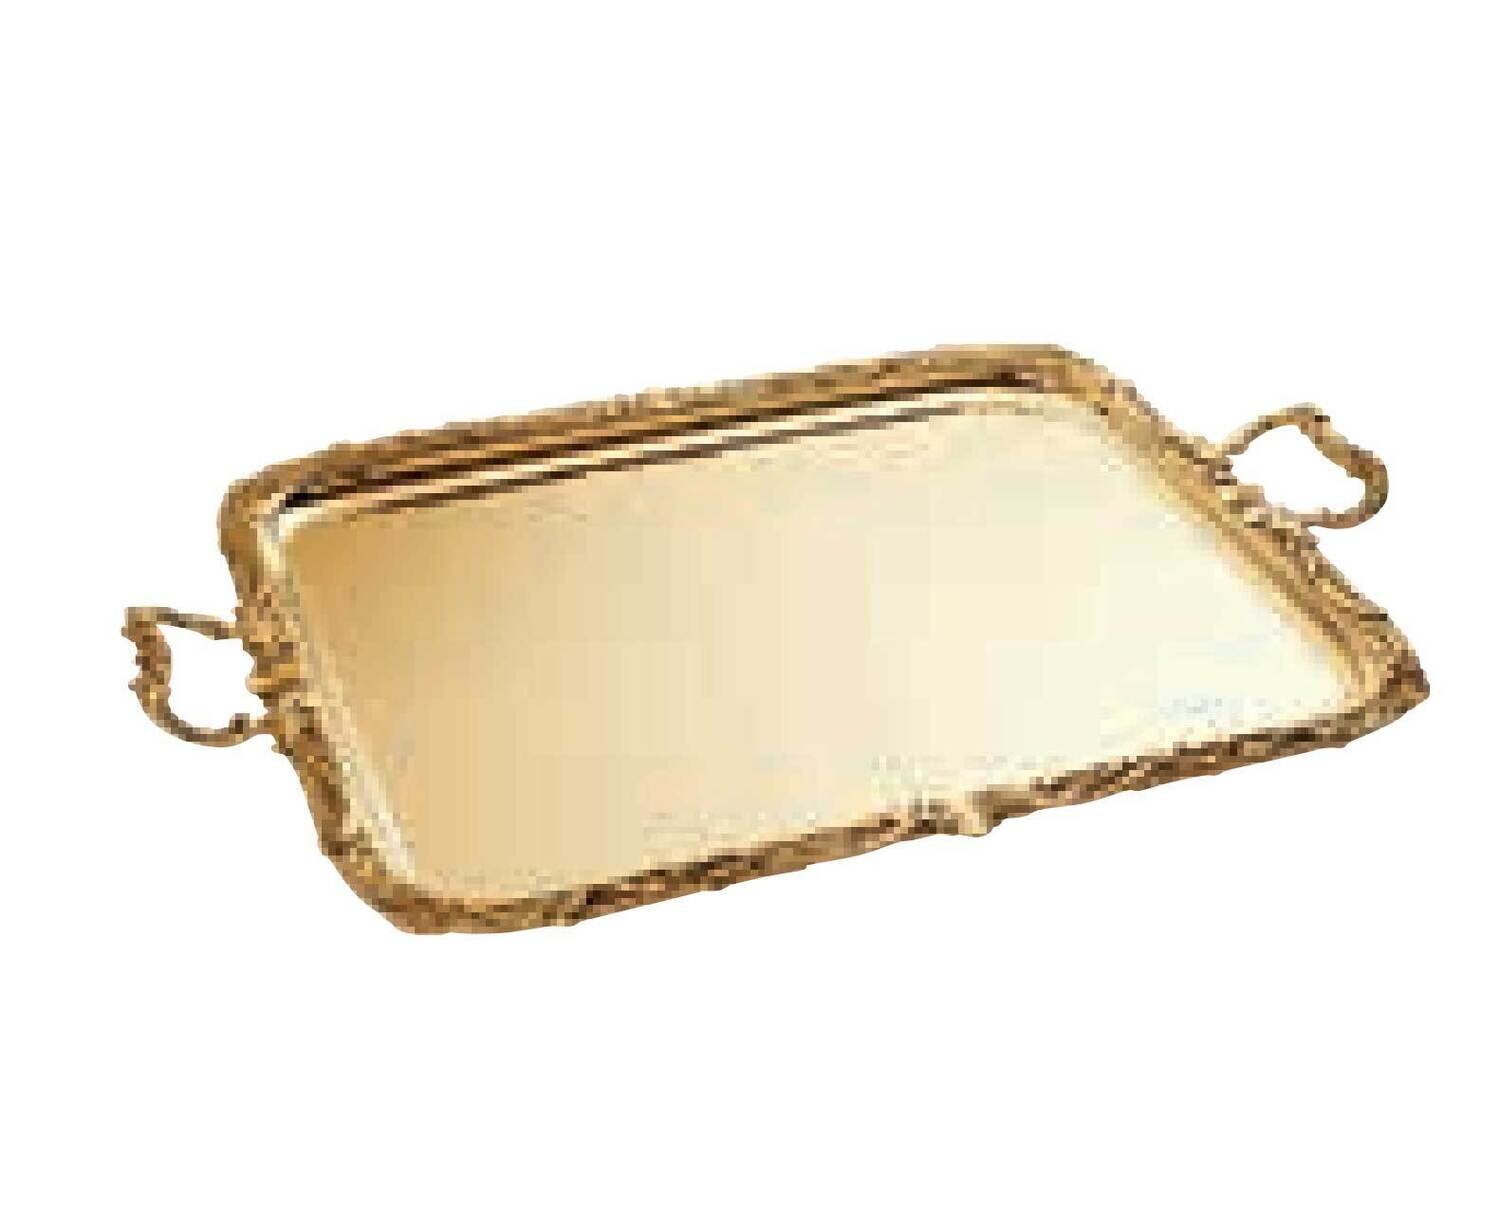 Ercuis Regence Rectangular Serving Tray With Handles 22.5 x 18.875 Inch Sterling Silver F306450-57